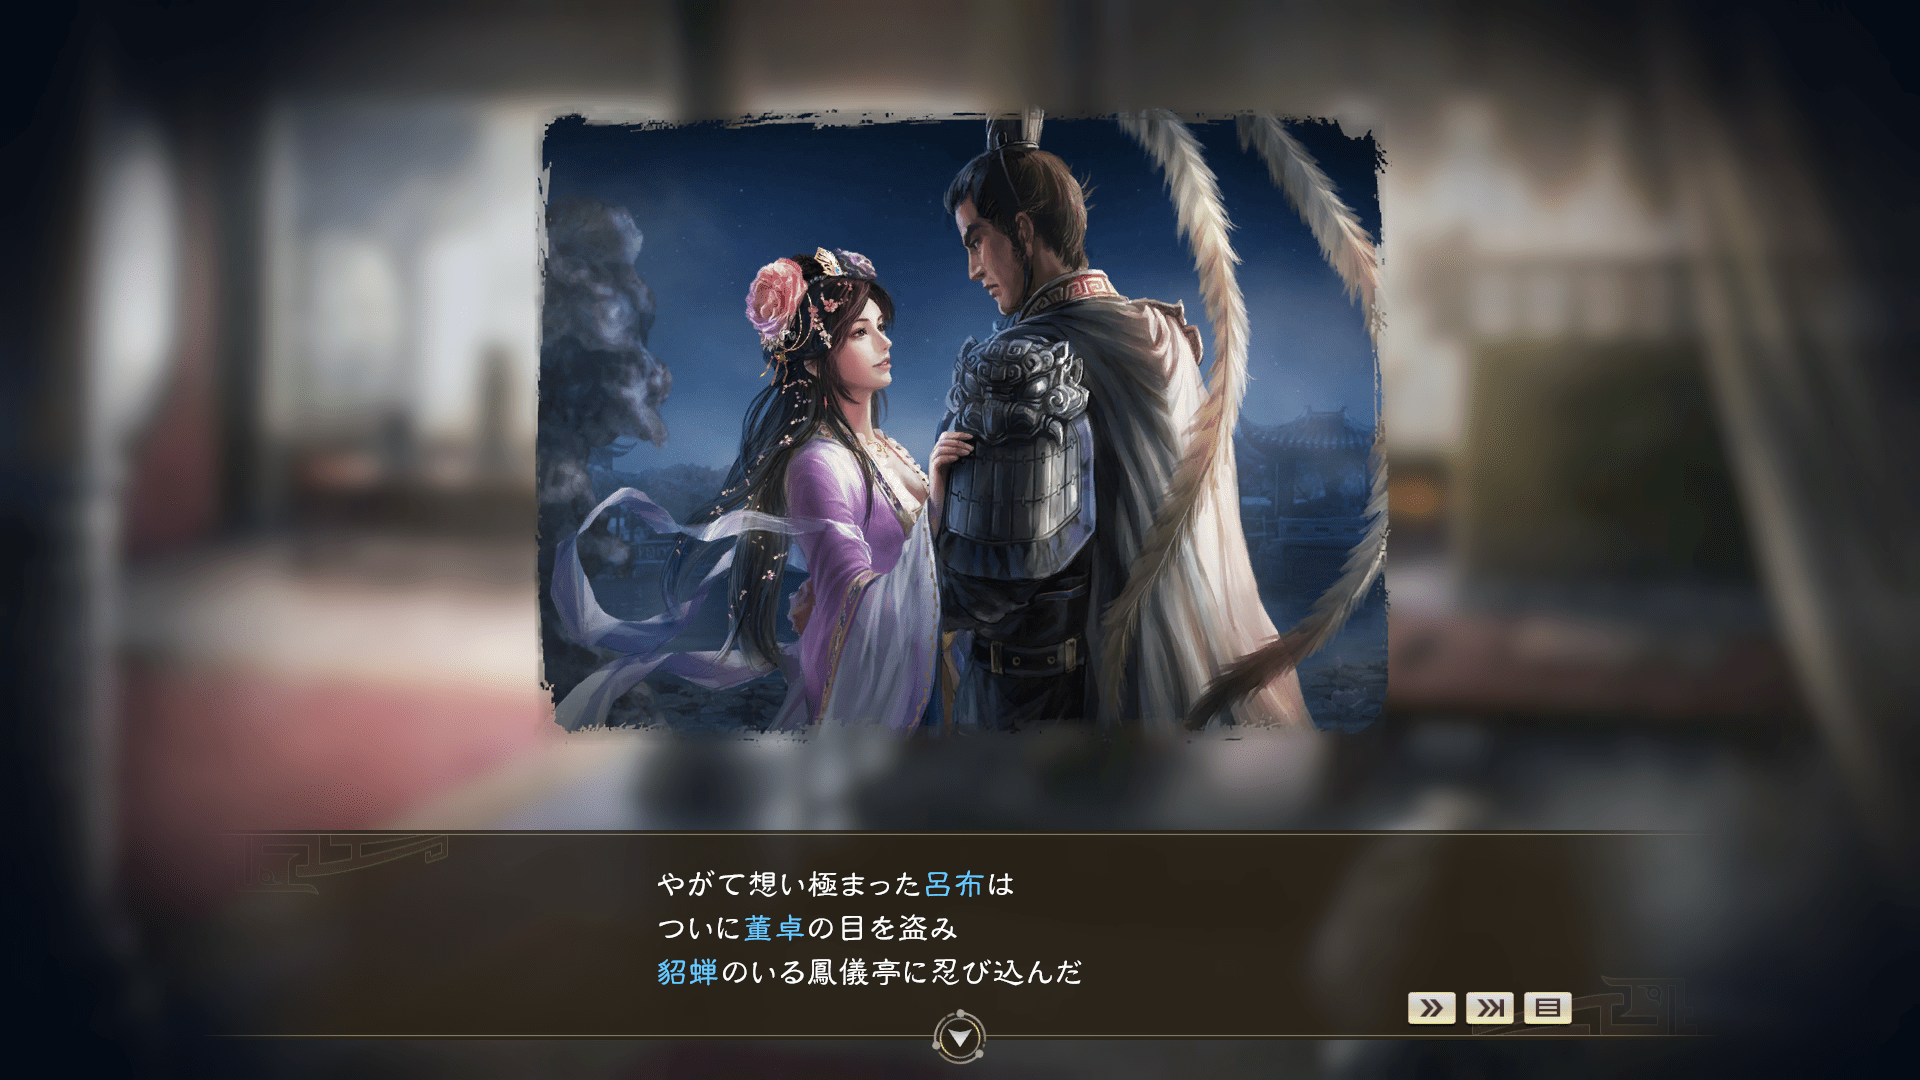 ROMANCE OF THE THREE KINGDOMS XIV New Dev Diary Introduces the Scenarios and Officer Character Traits